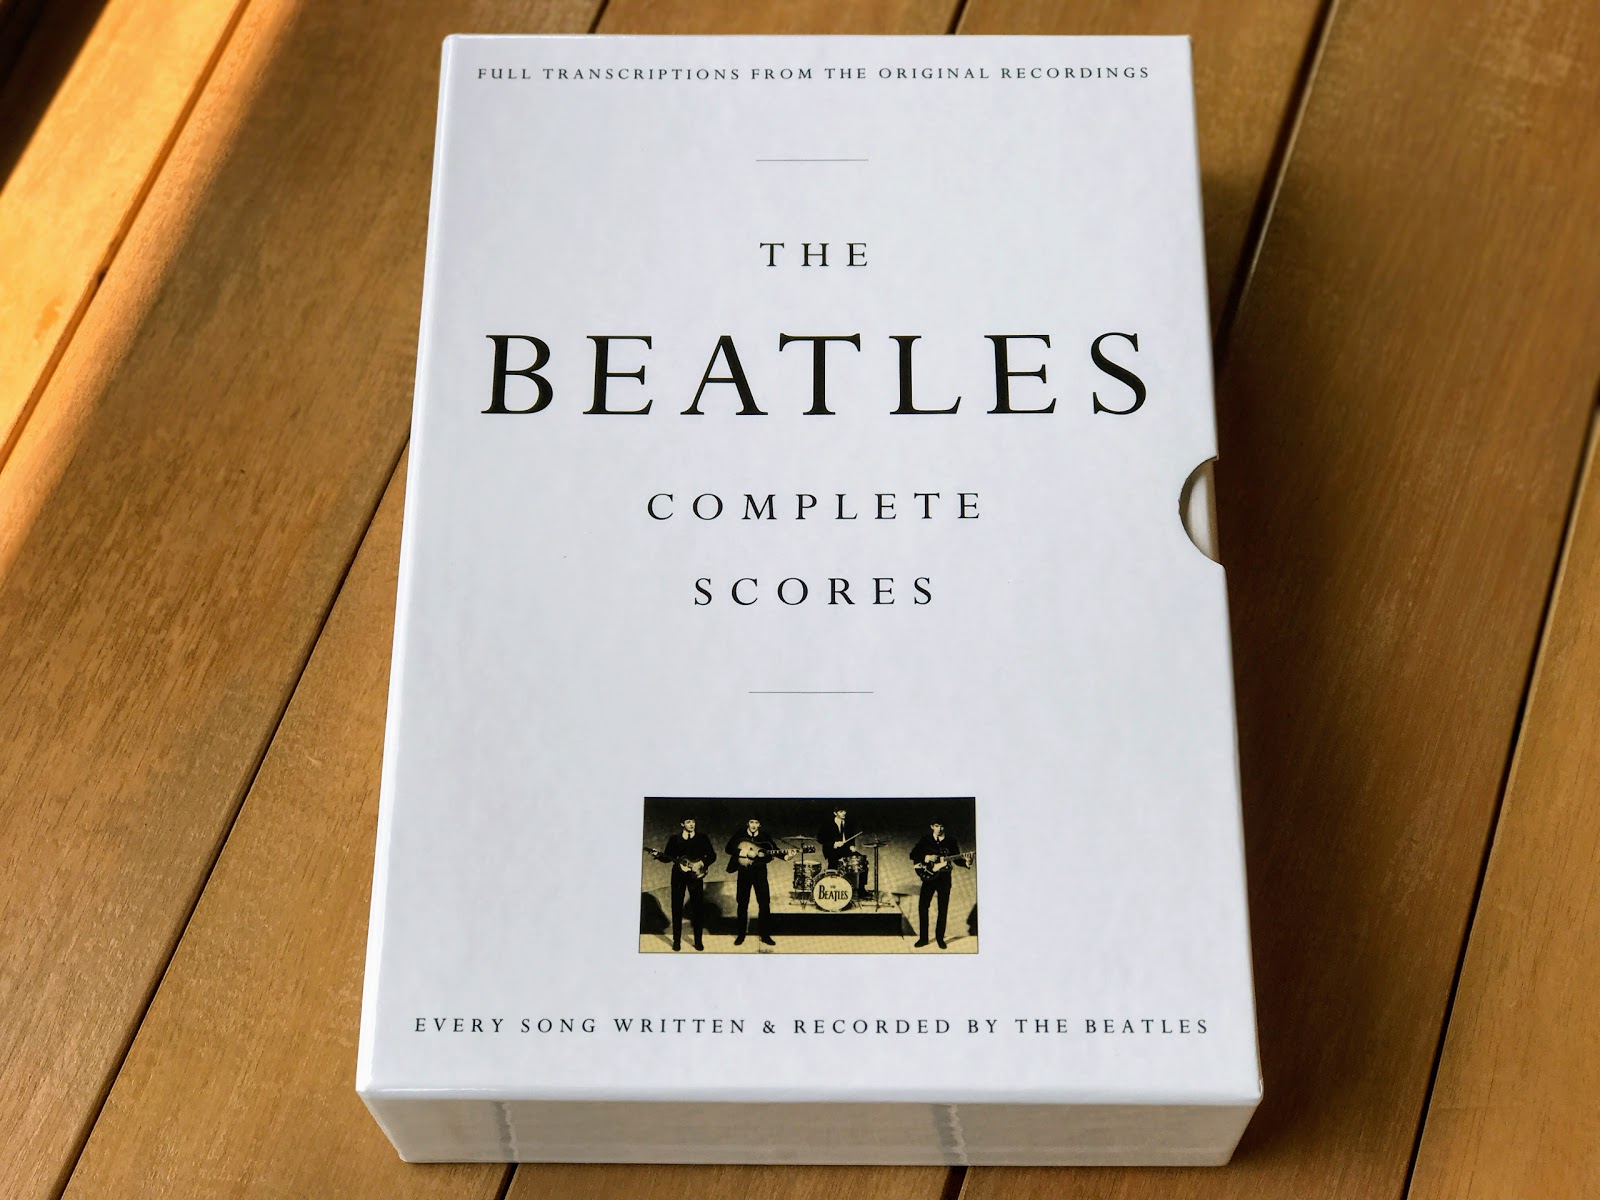 THE BEATLES COMPLETE SCORES